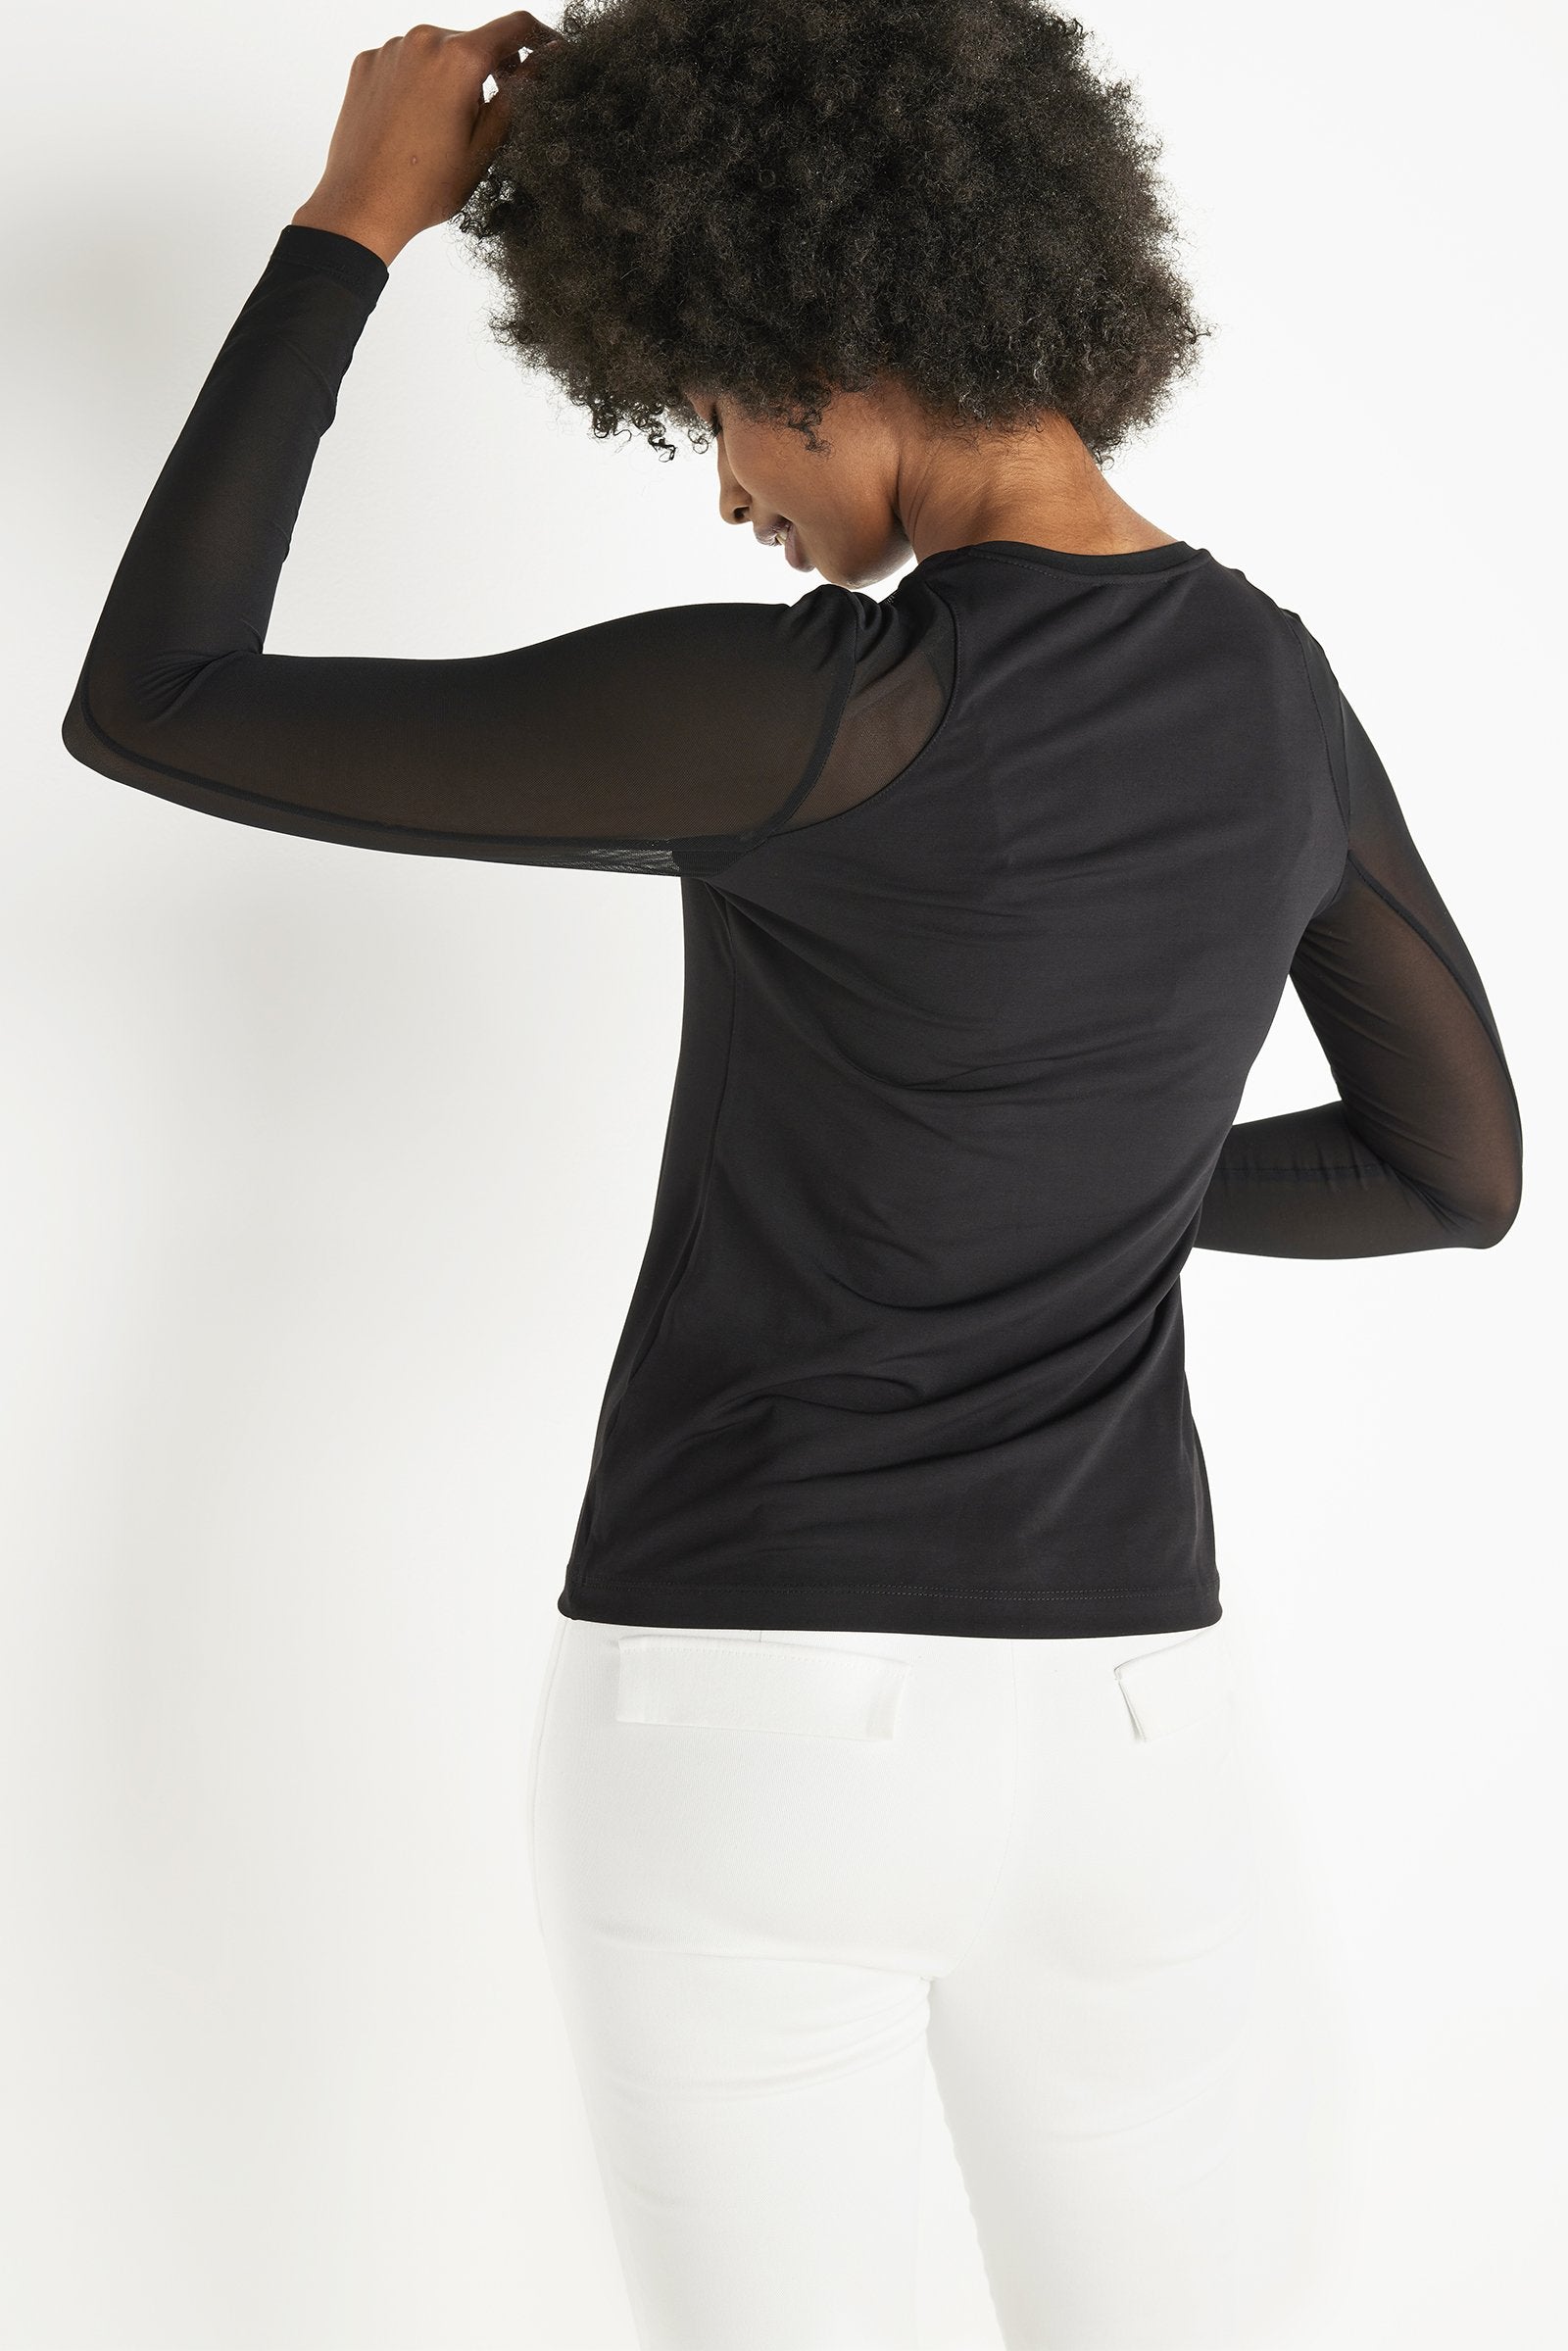 Meet Isla: our newest sillouette stylish member, truly a must-have lightweight long-sleeve top crafted in super soft stretch jersey and power mesh  blend with elegant signature stretch power mesh sleeves and front and back panels. A sleek silhouette and V-neck front with mesh overlay make it a modern wardrobe essential for travel and everyday. 